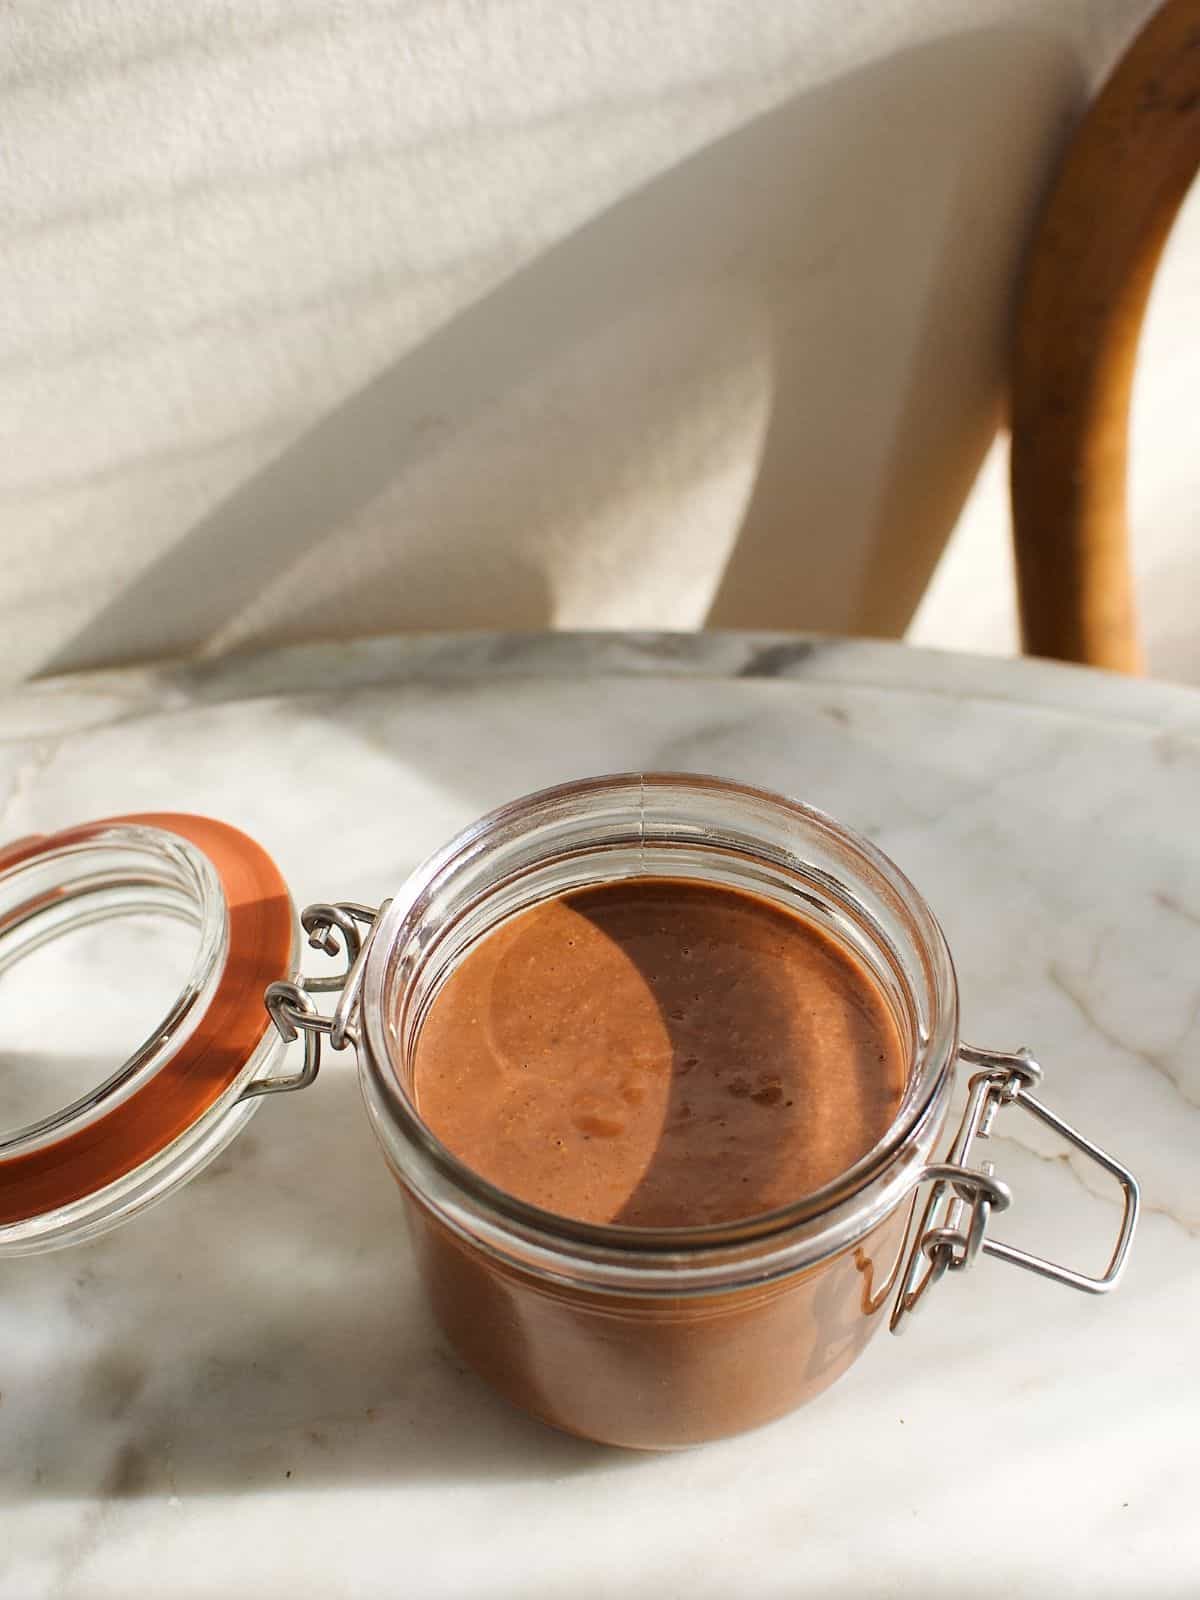 freshly-made gianduja in a glass container.